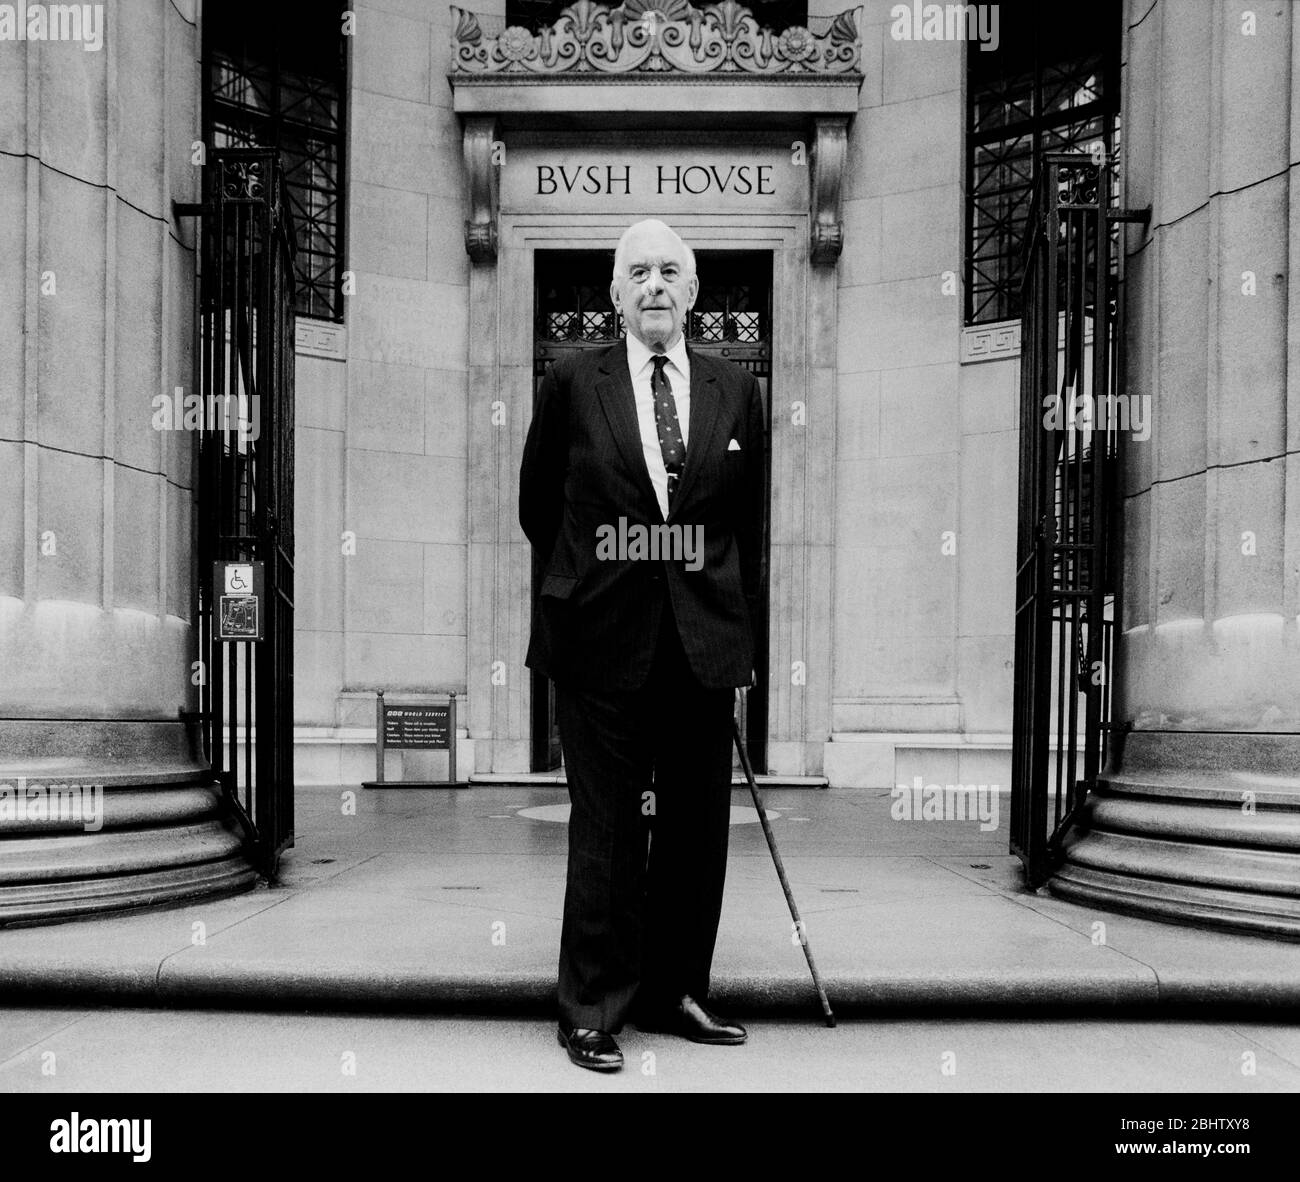 Marmaduke Hussey, Baron Hussey of North Bradley, also known as Duke Hussey, outside Bush House in London. He was Chairman of the Board of Governors of the BBC between 1986 and 1996. Stock Photo